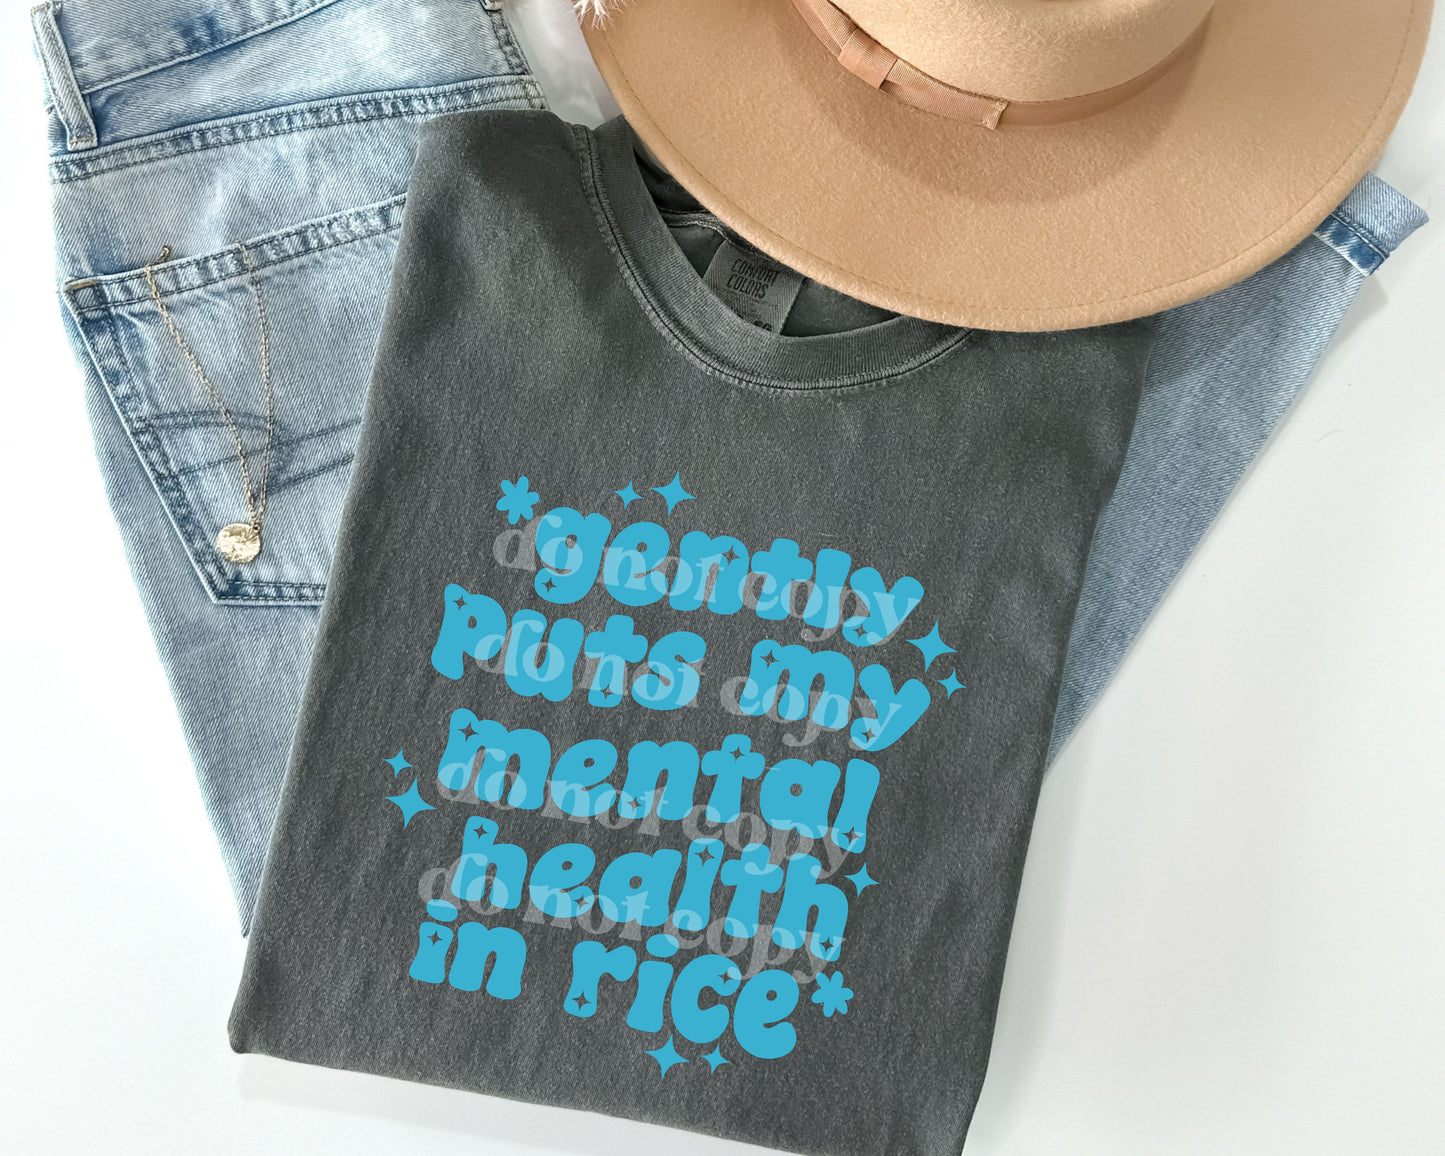 Gently Puts My Mental Health in Rice | Screen Print Transfer